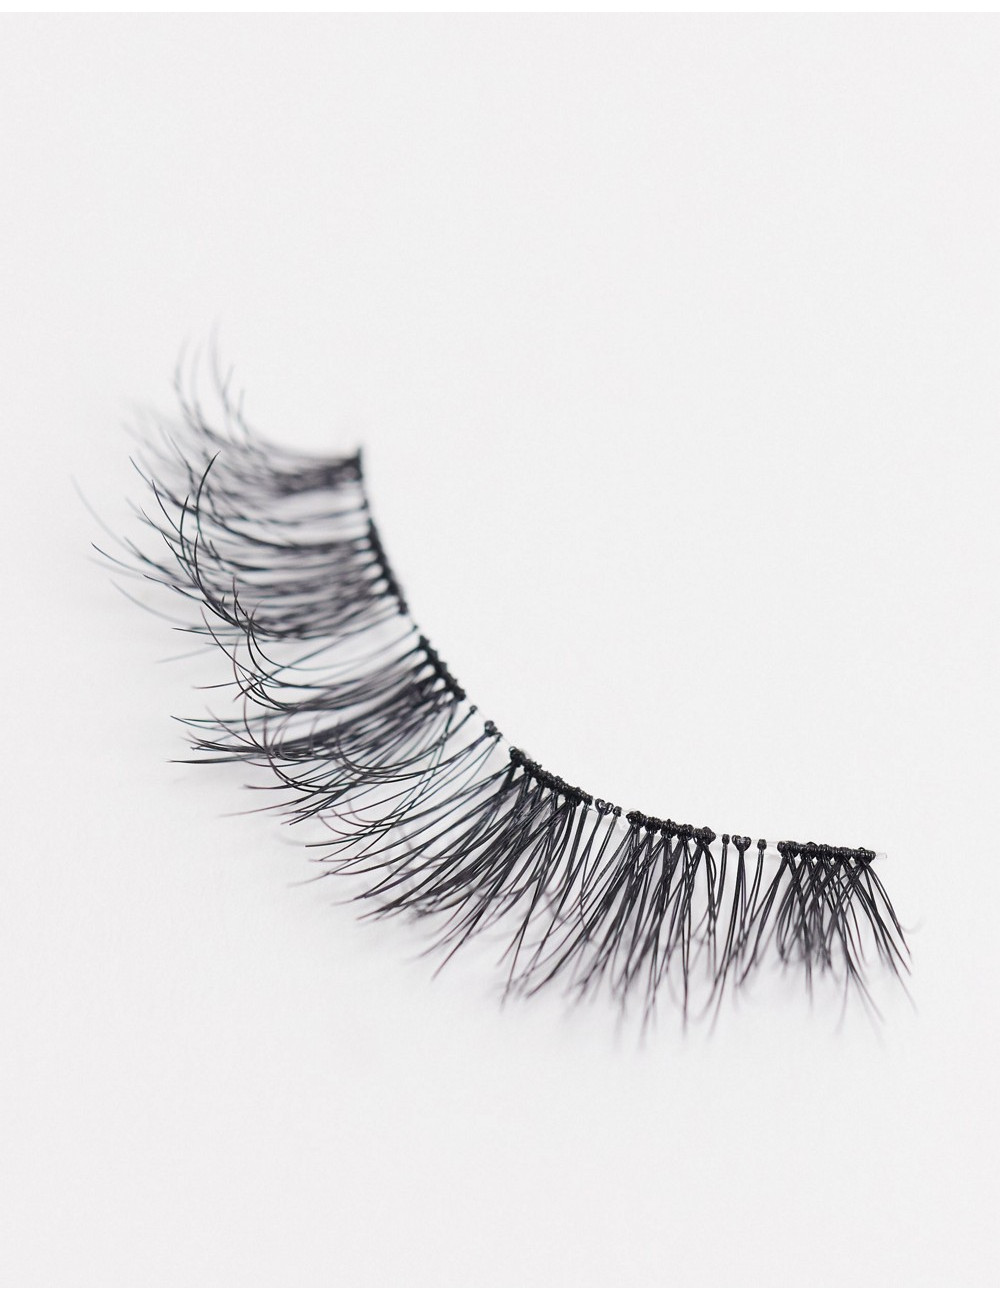 Ardell Naked Lashes - 429